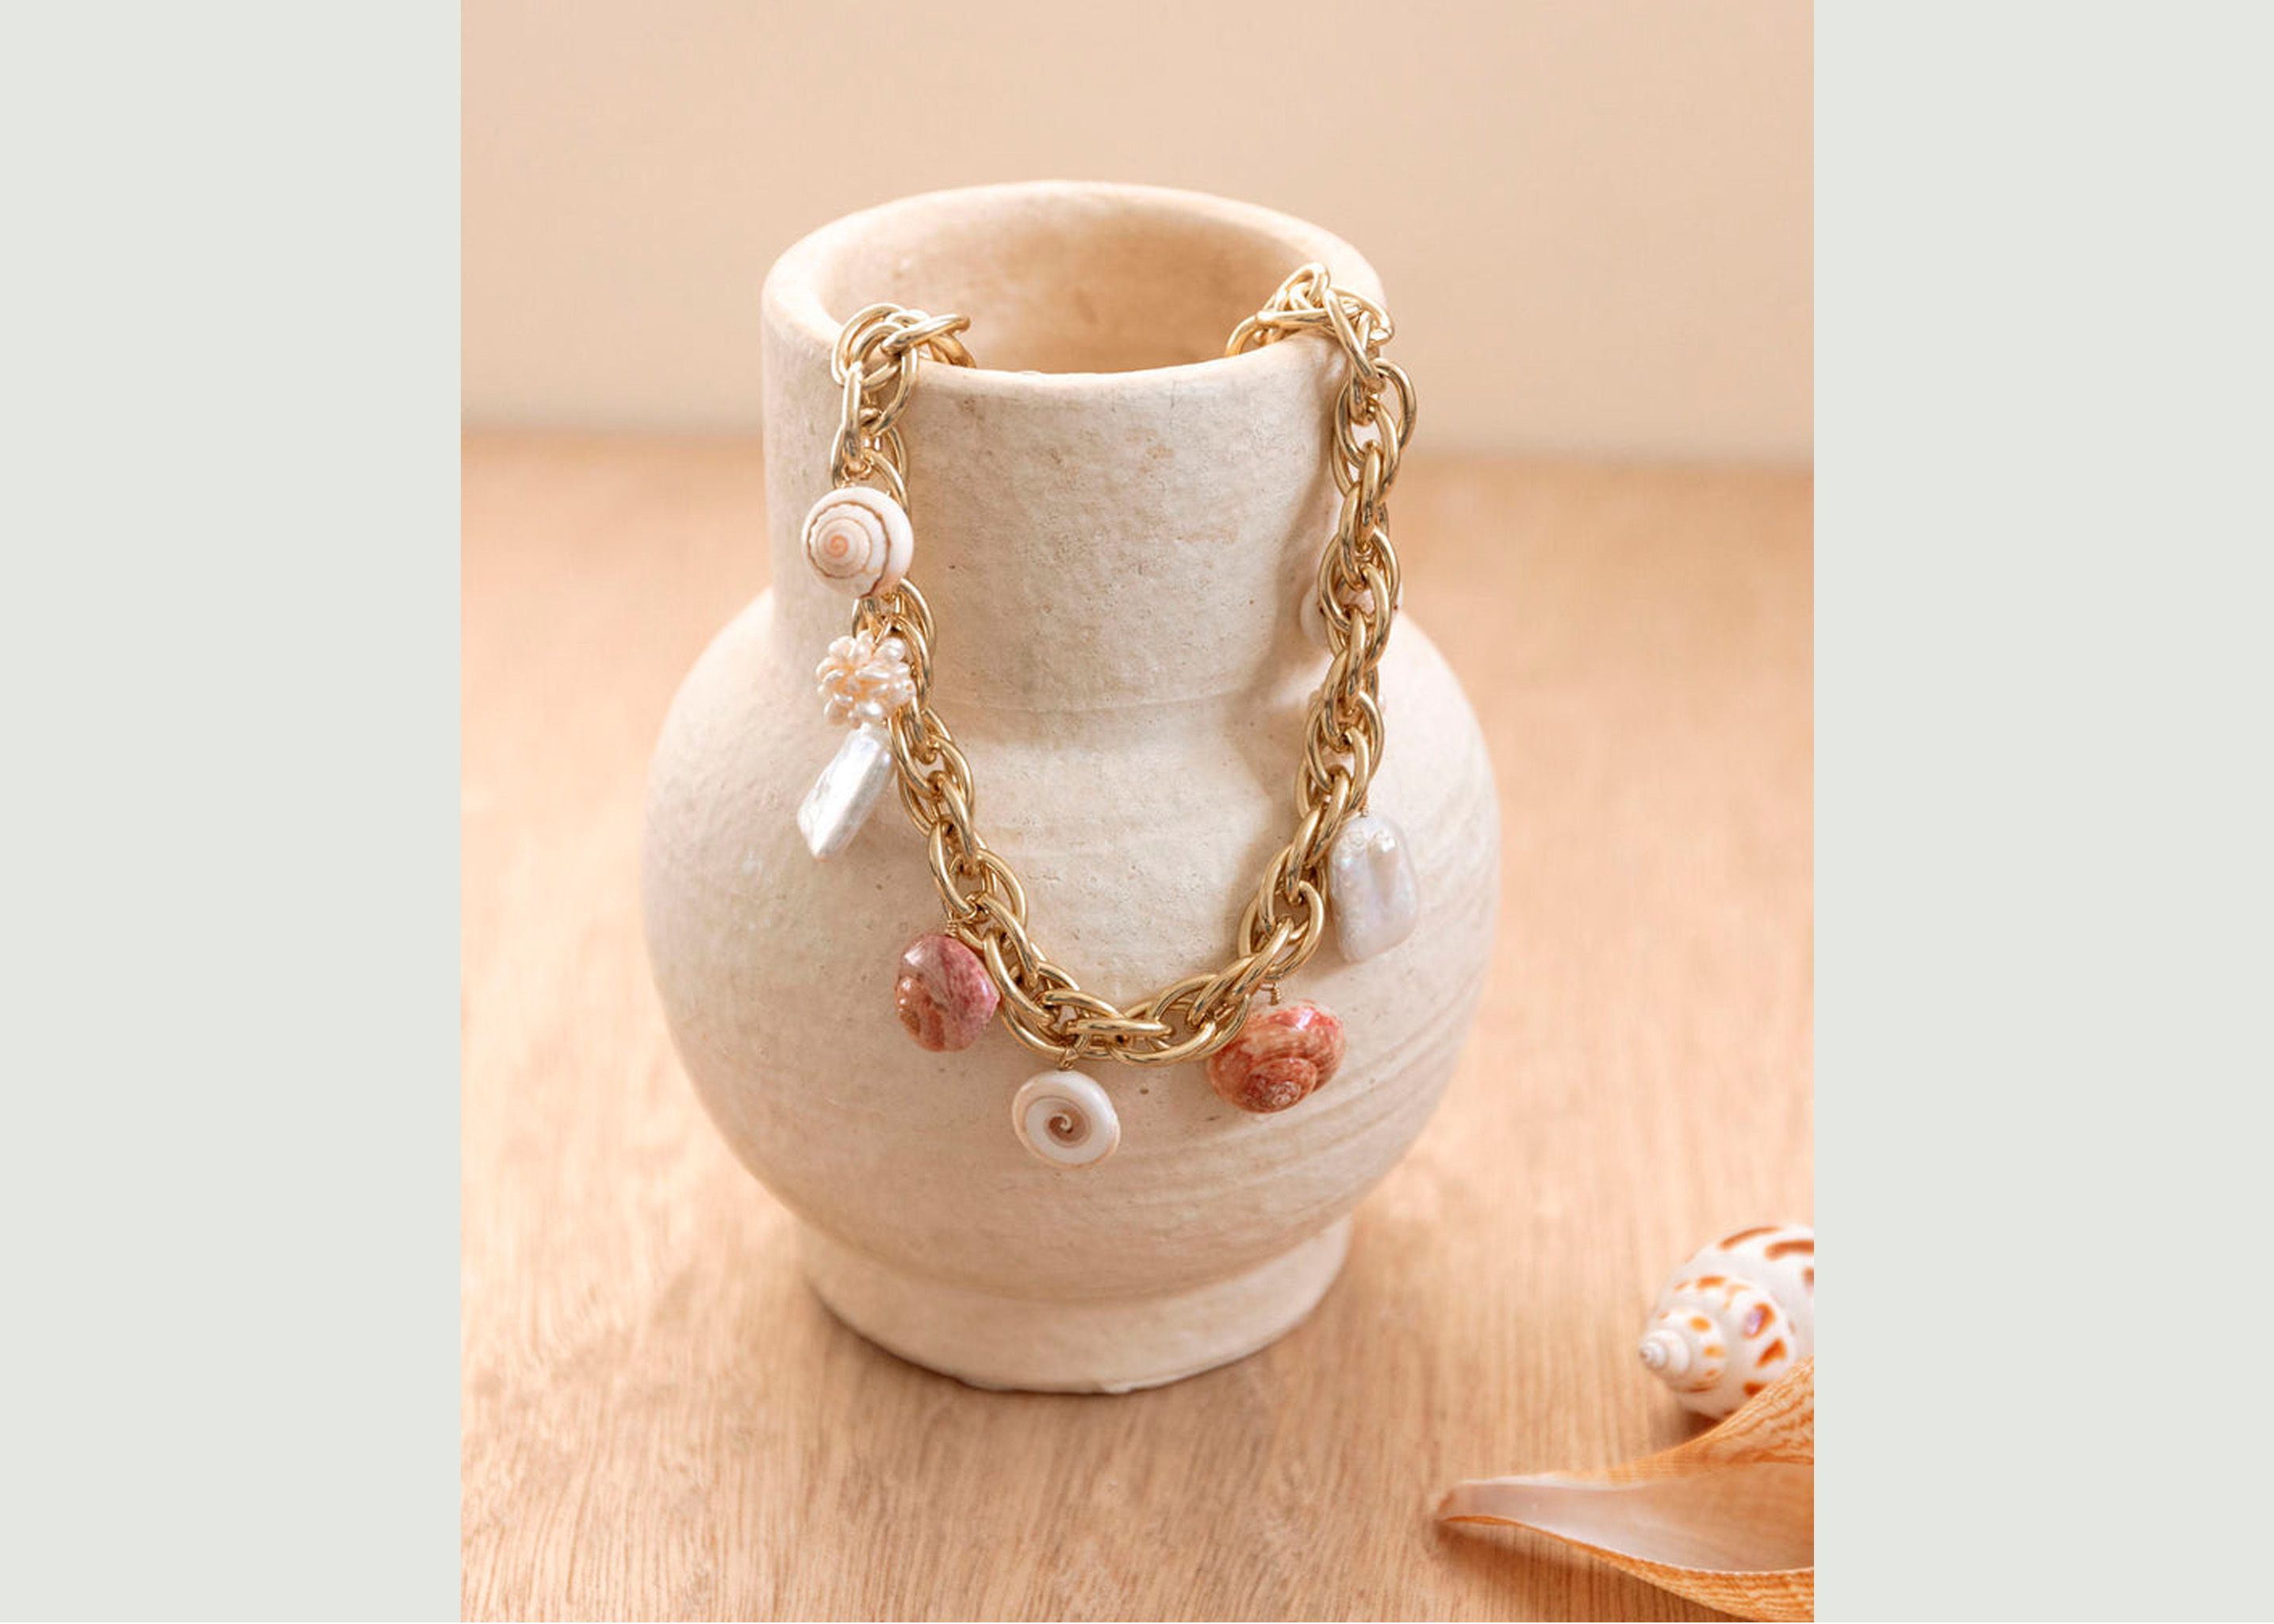 Ali shell and pearl choker necklace - Gisel B.